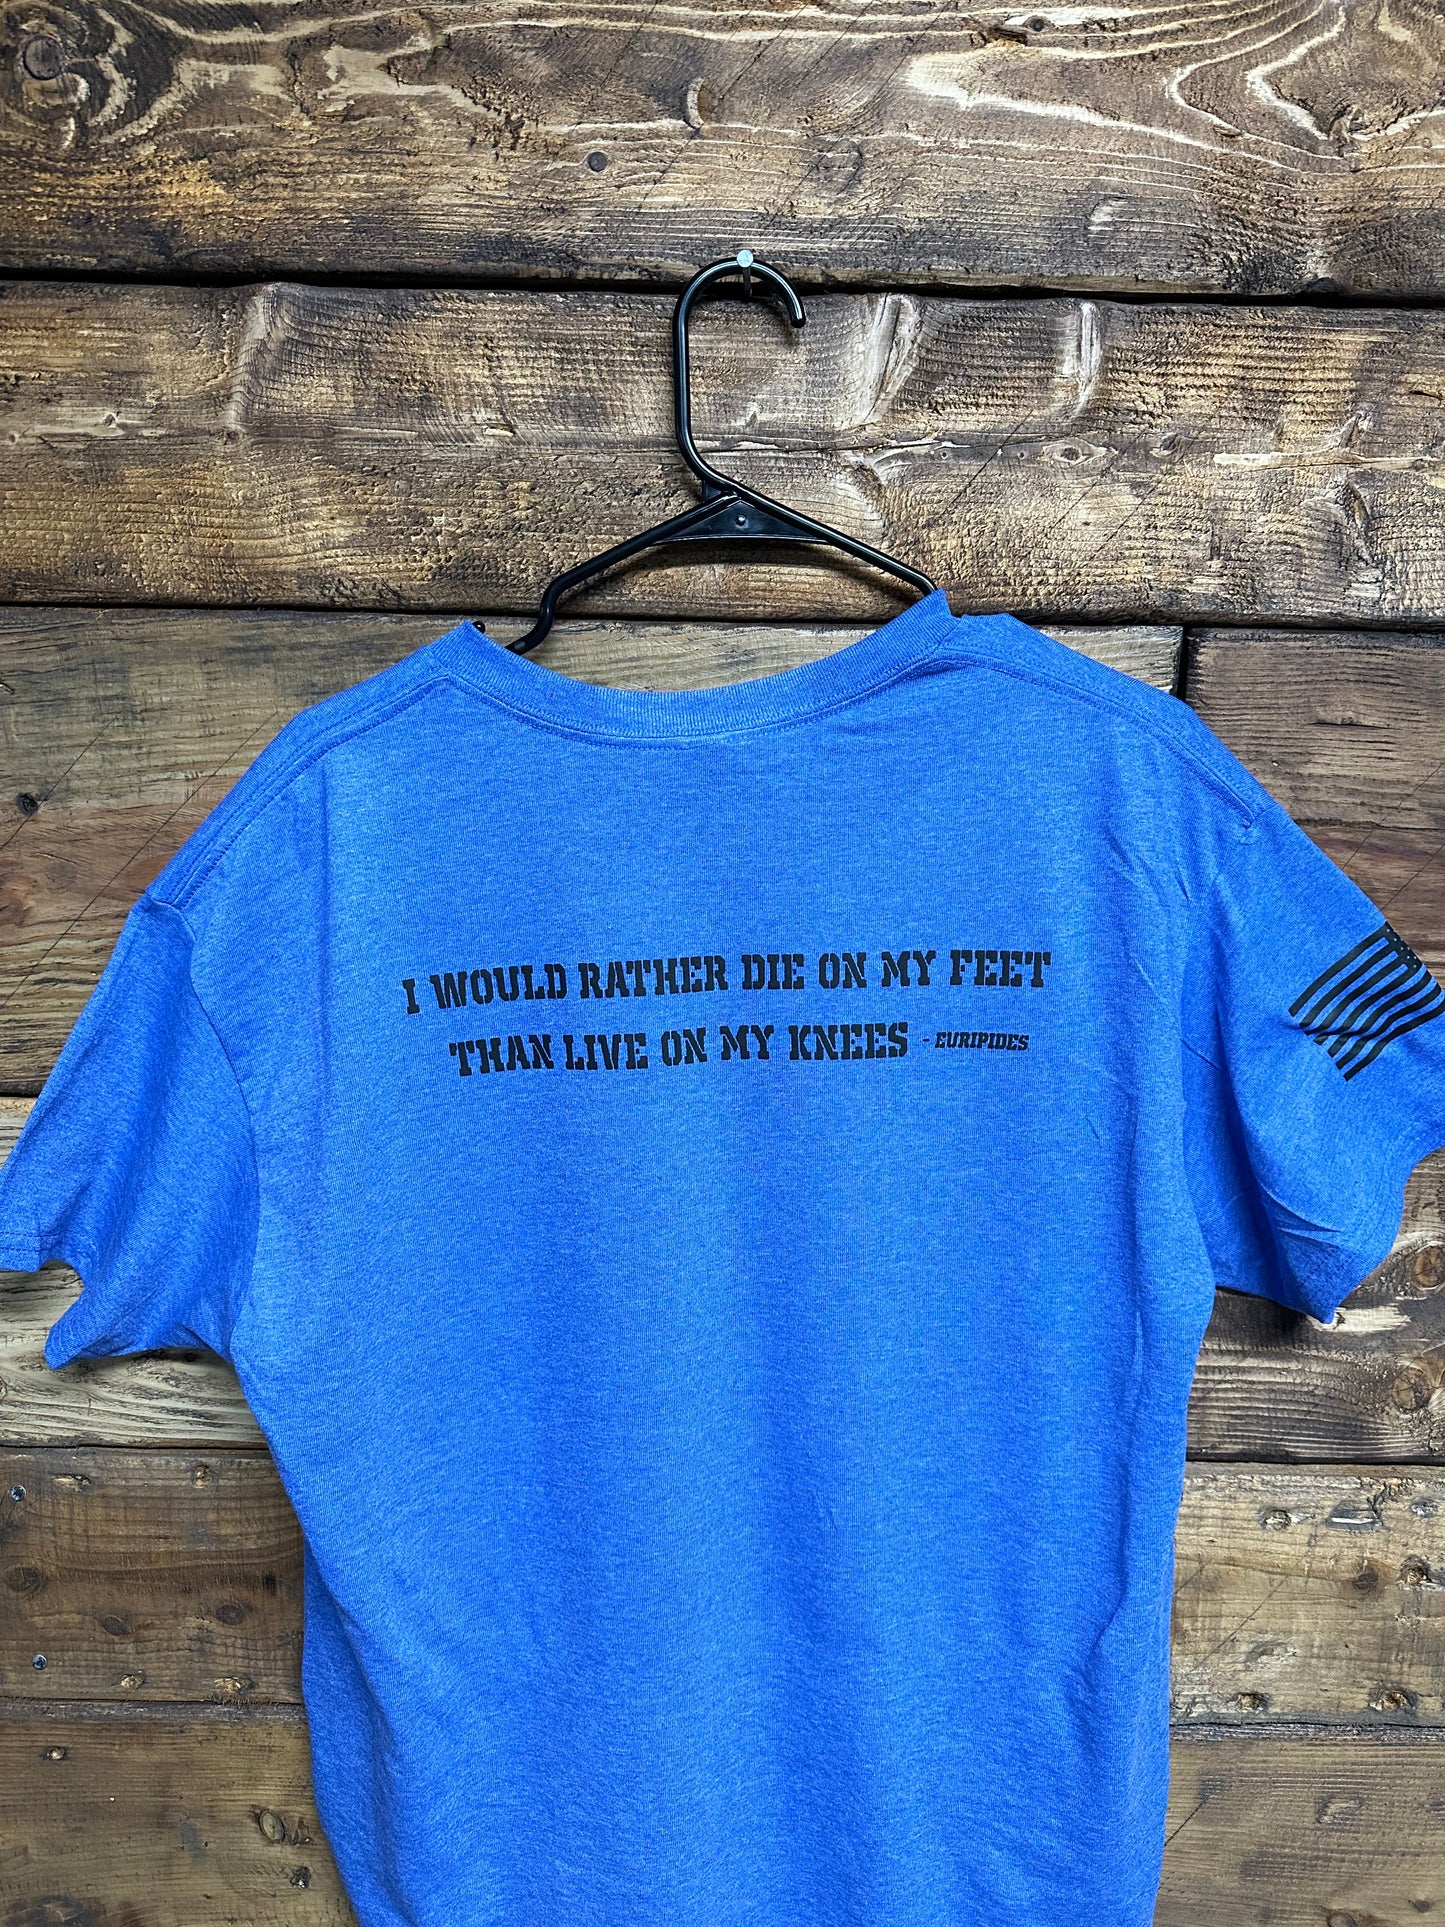 NE Blue T-Shirt with quote “I would rather die on my feet than live on my knees”